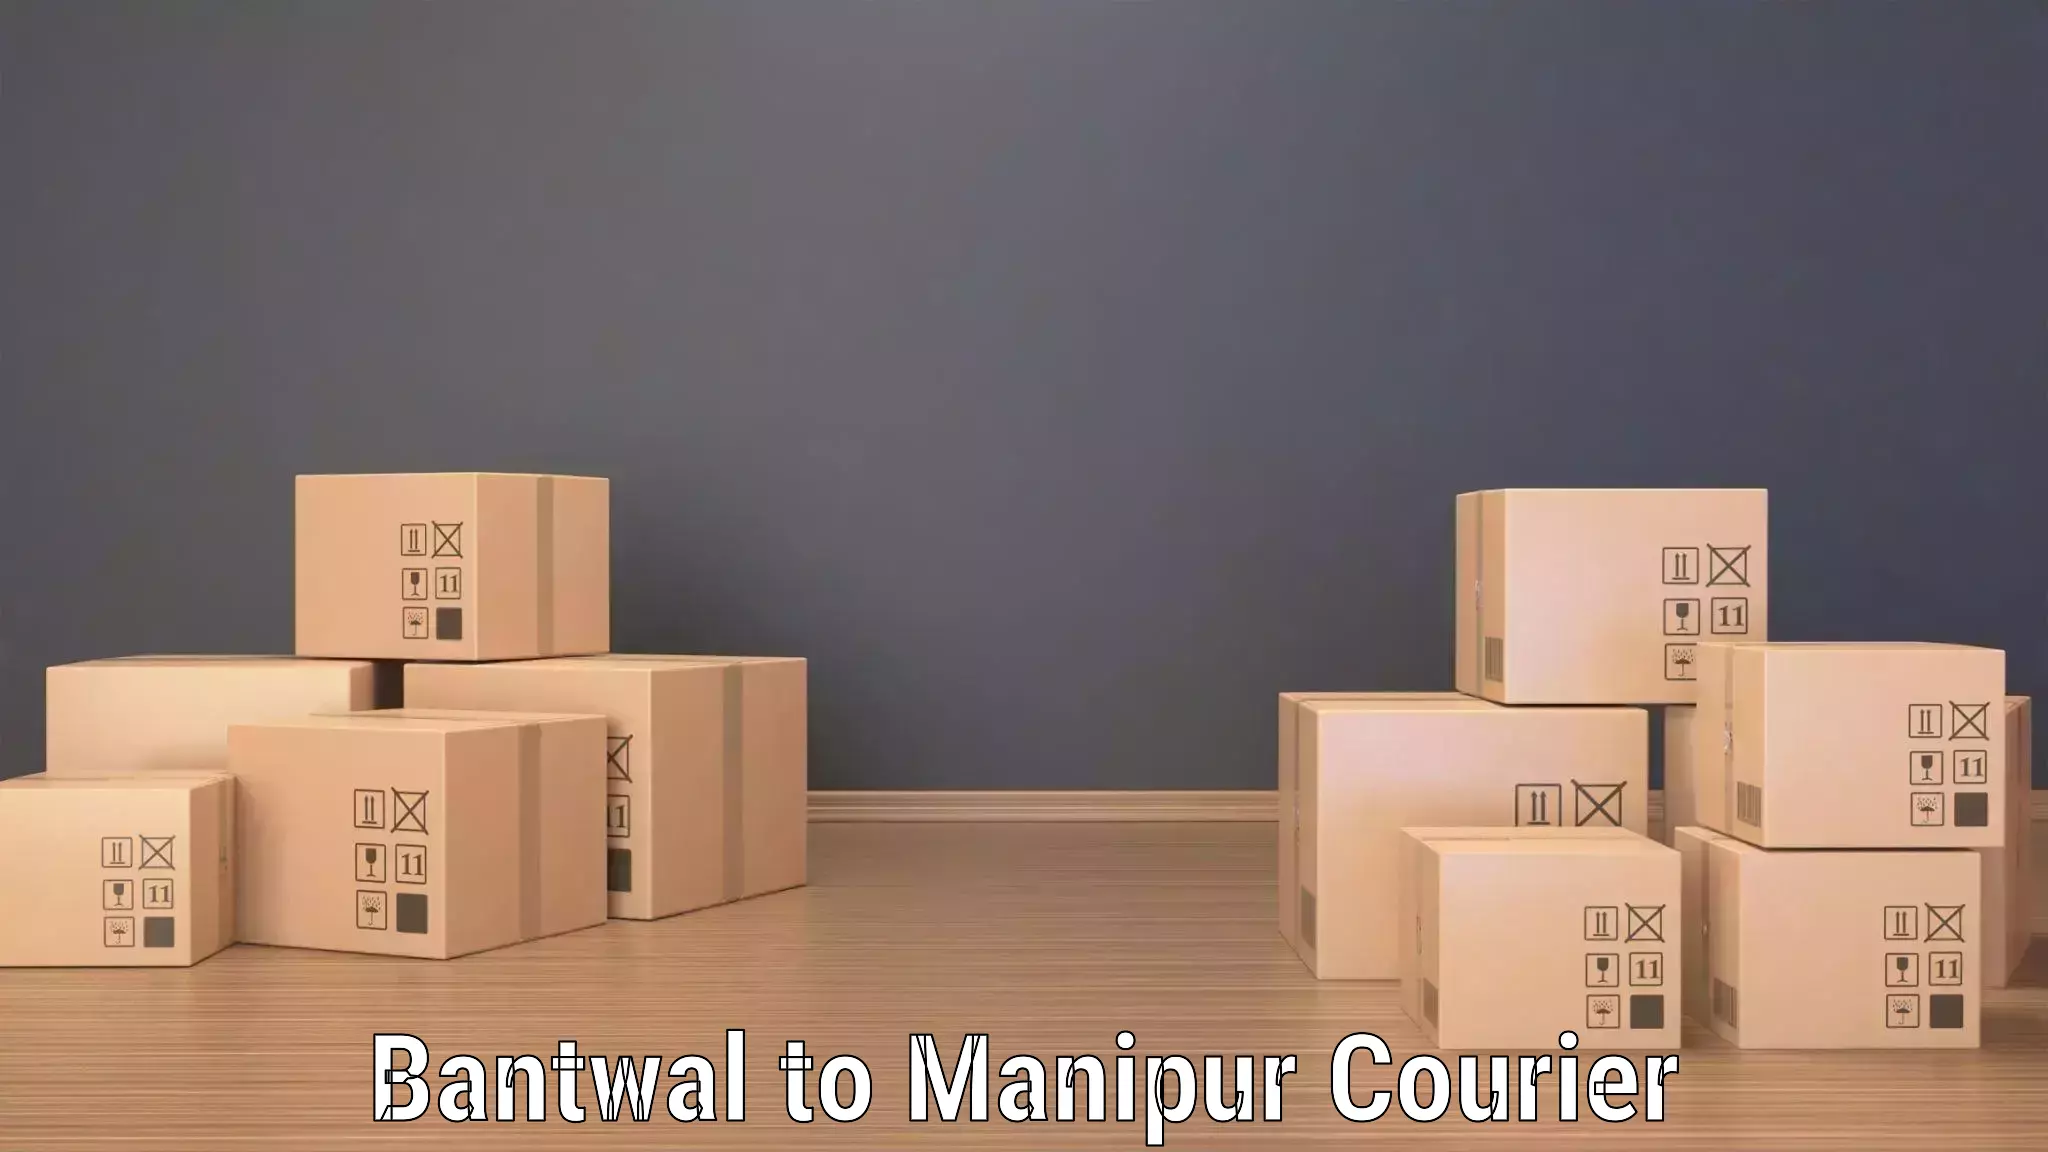 Courier service innovation Bantwal to Manipur